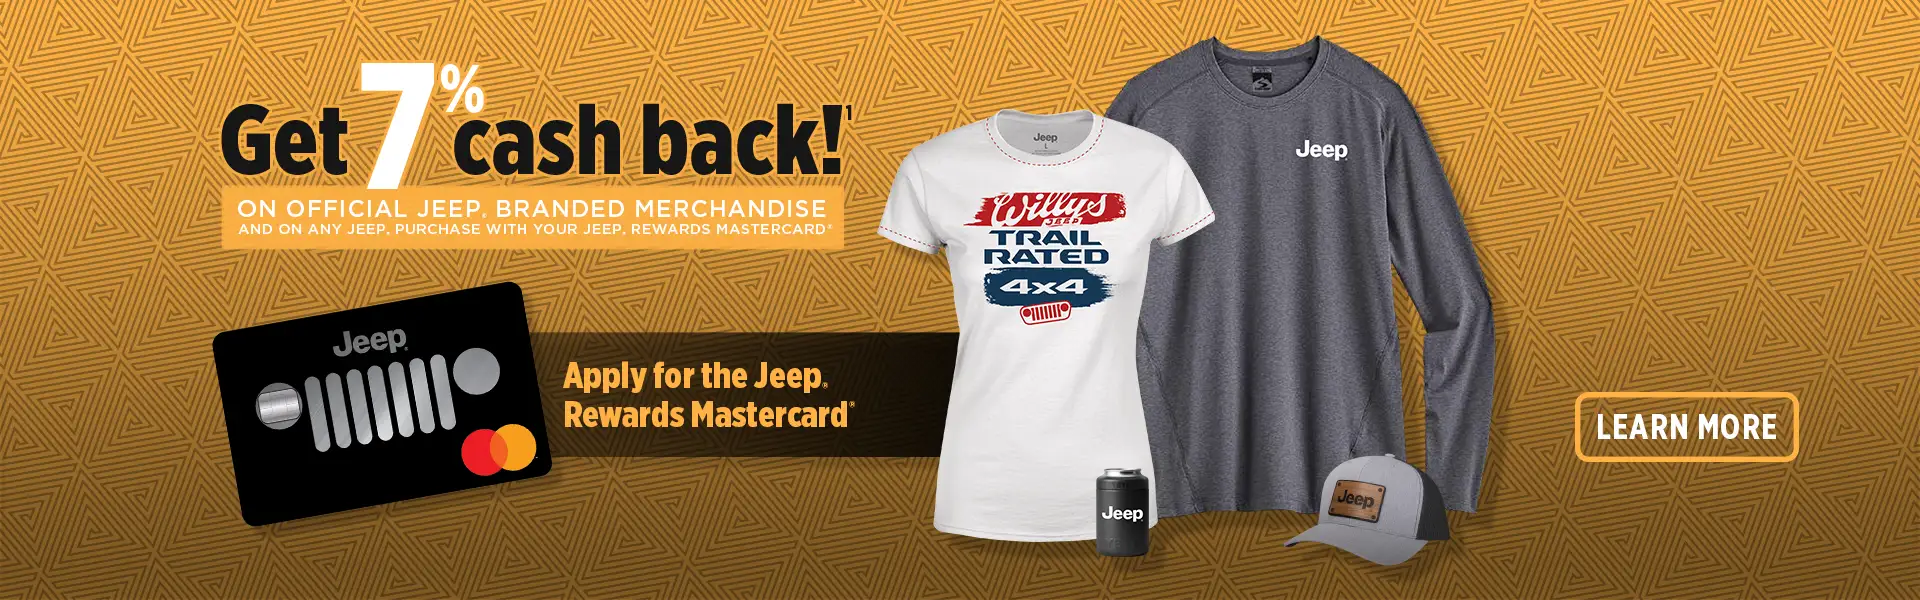 Jeep apparel and merchandise from the official store - Jeep Gear